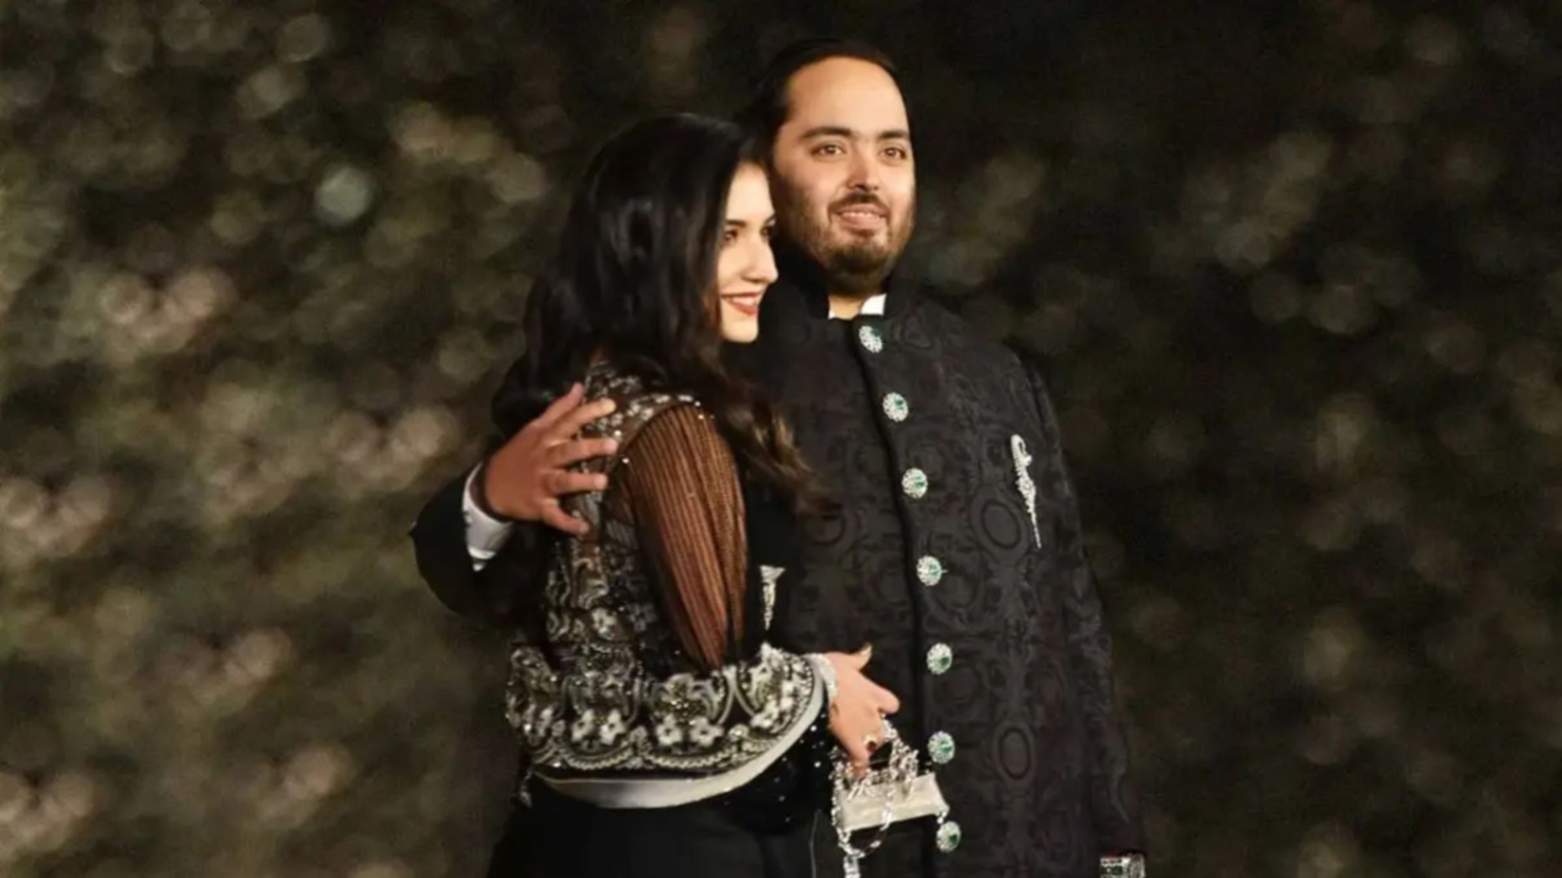 Traffic Restrictions in BKC for Anant Ambani and Radhika Merchant’s Wedding Spark Outrage